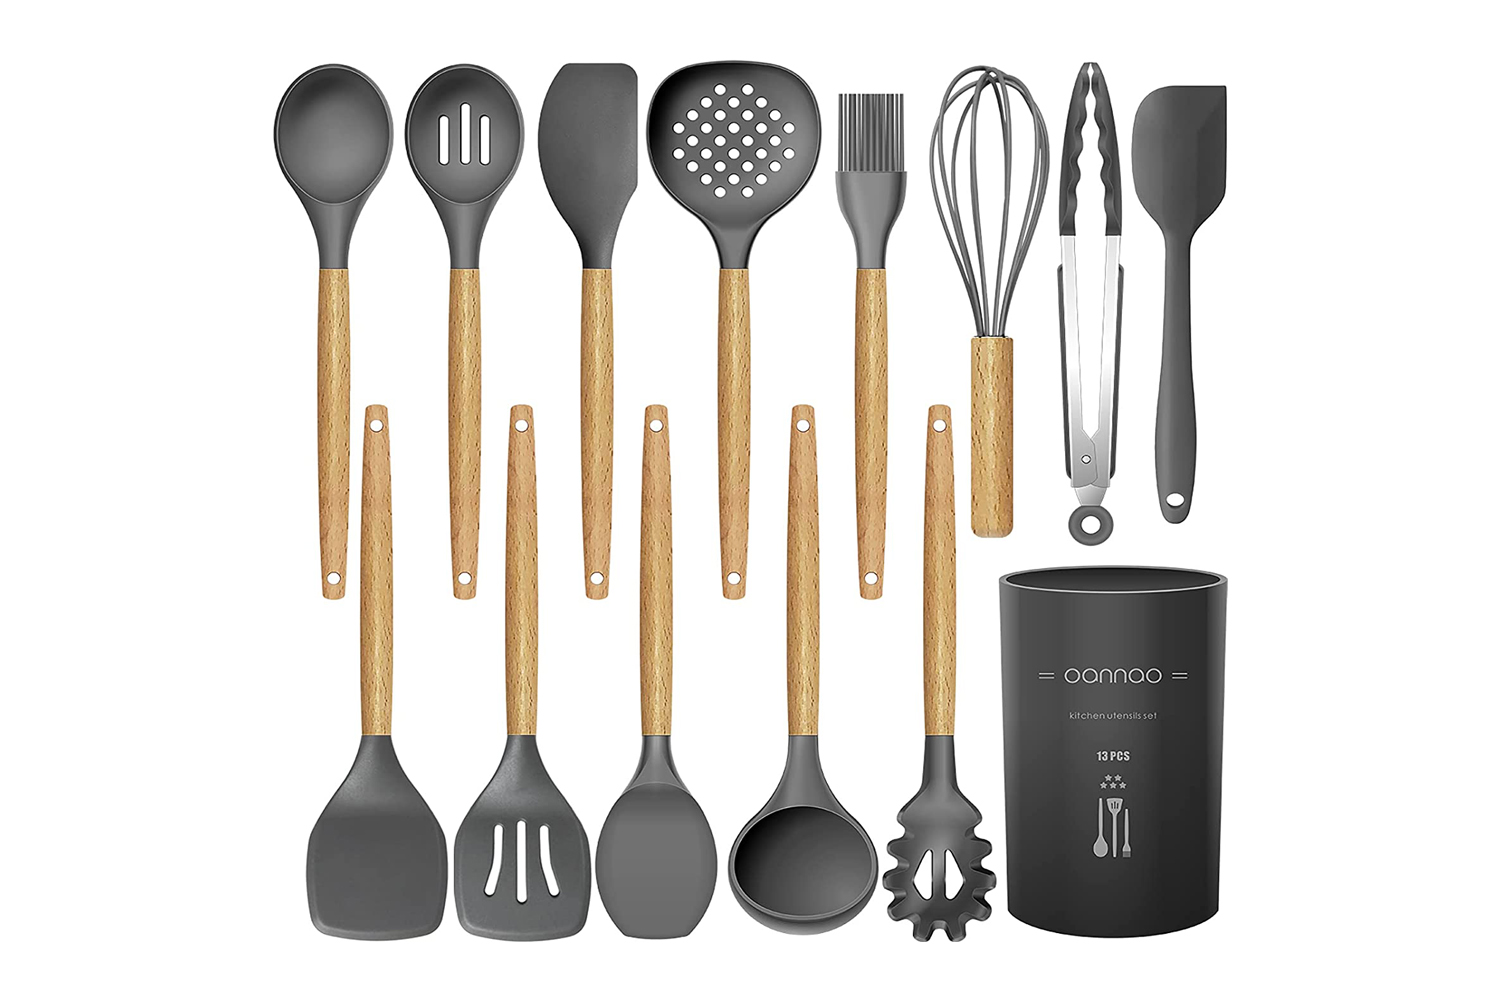 https://www.themanual.com/wp-content/uploads/sites/9/2021/09/oannao-14-piece-silicone-cooking-kitchen-utensil-set.jpg?fit=800%2C800&p=1